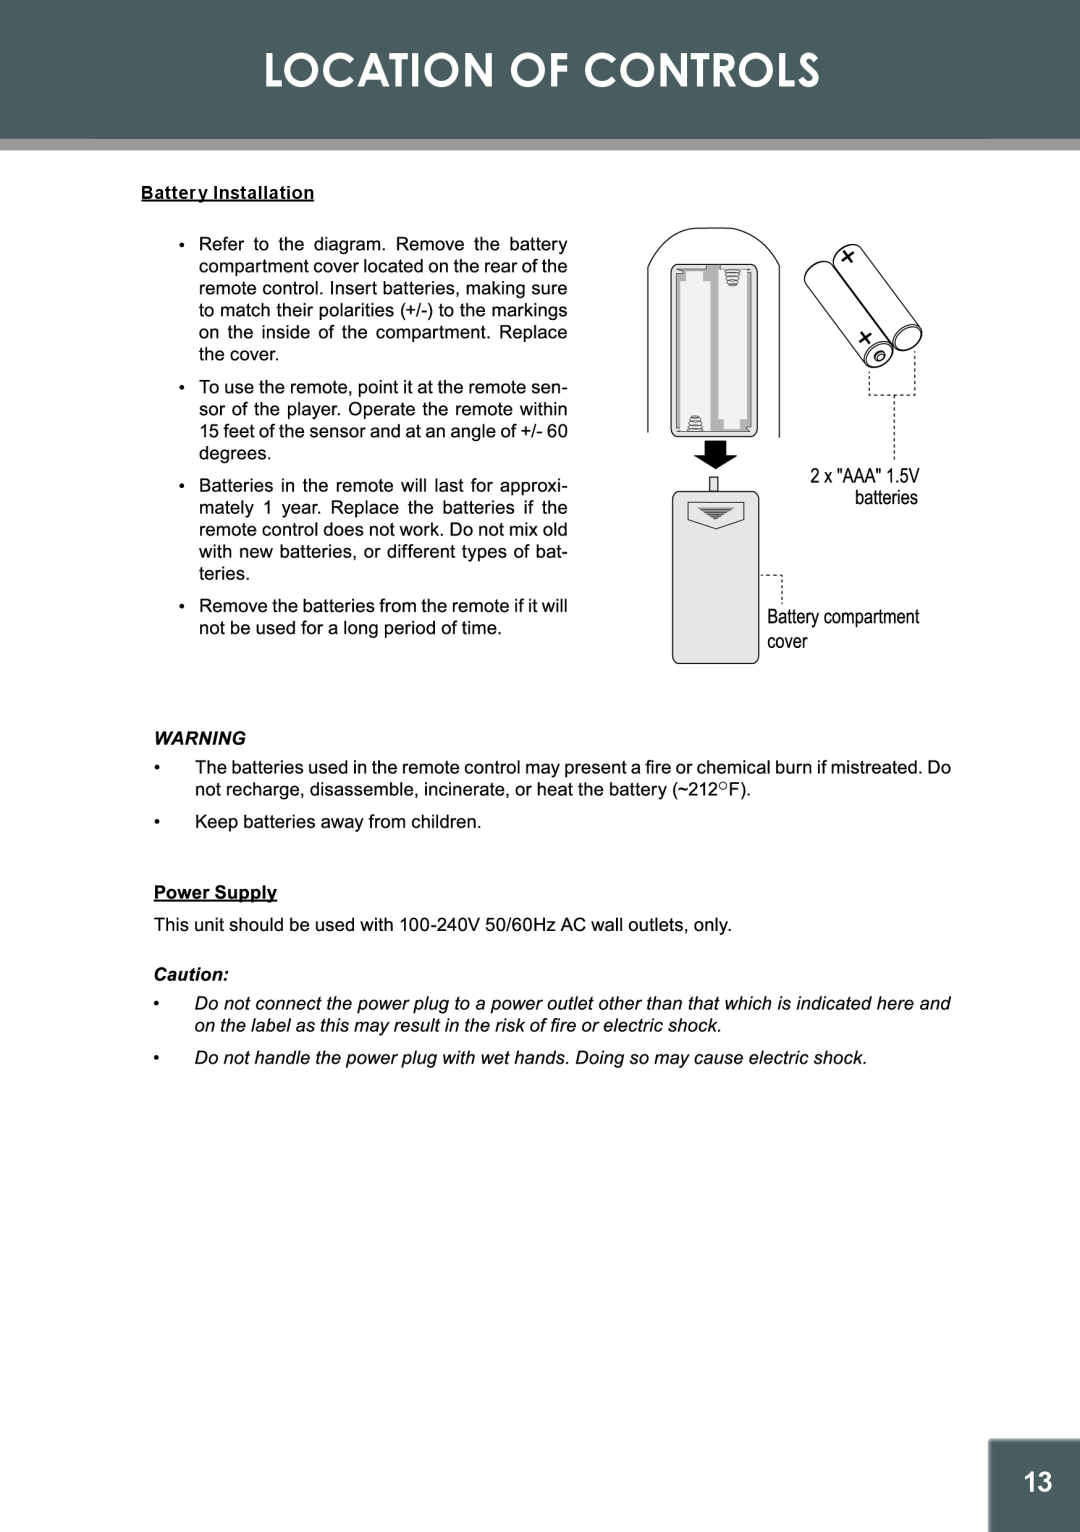 COBY electronic 907-FD10-29S1-00R, TFDVD1029 instruction manual Location Of Controls, Battery Installation 